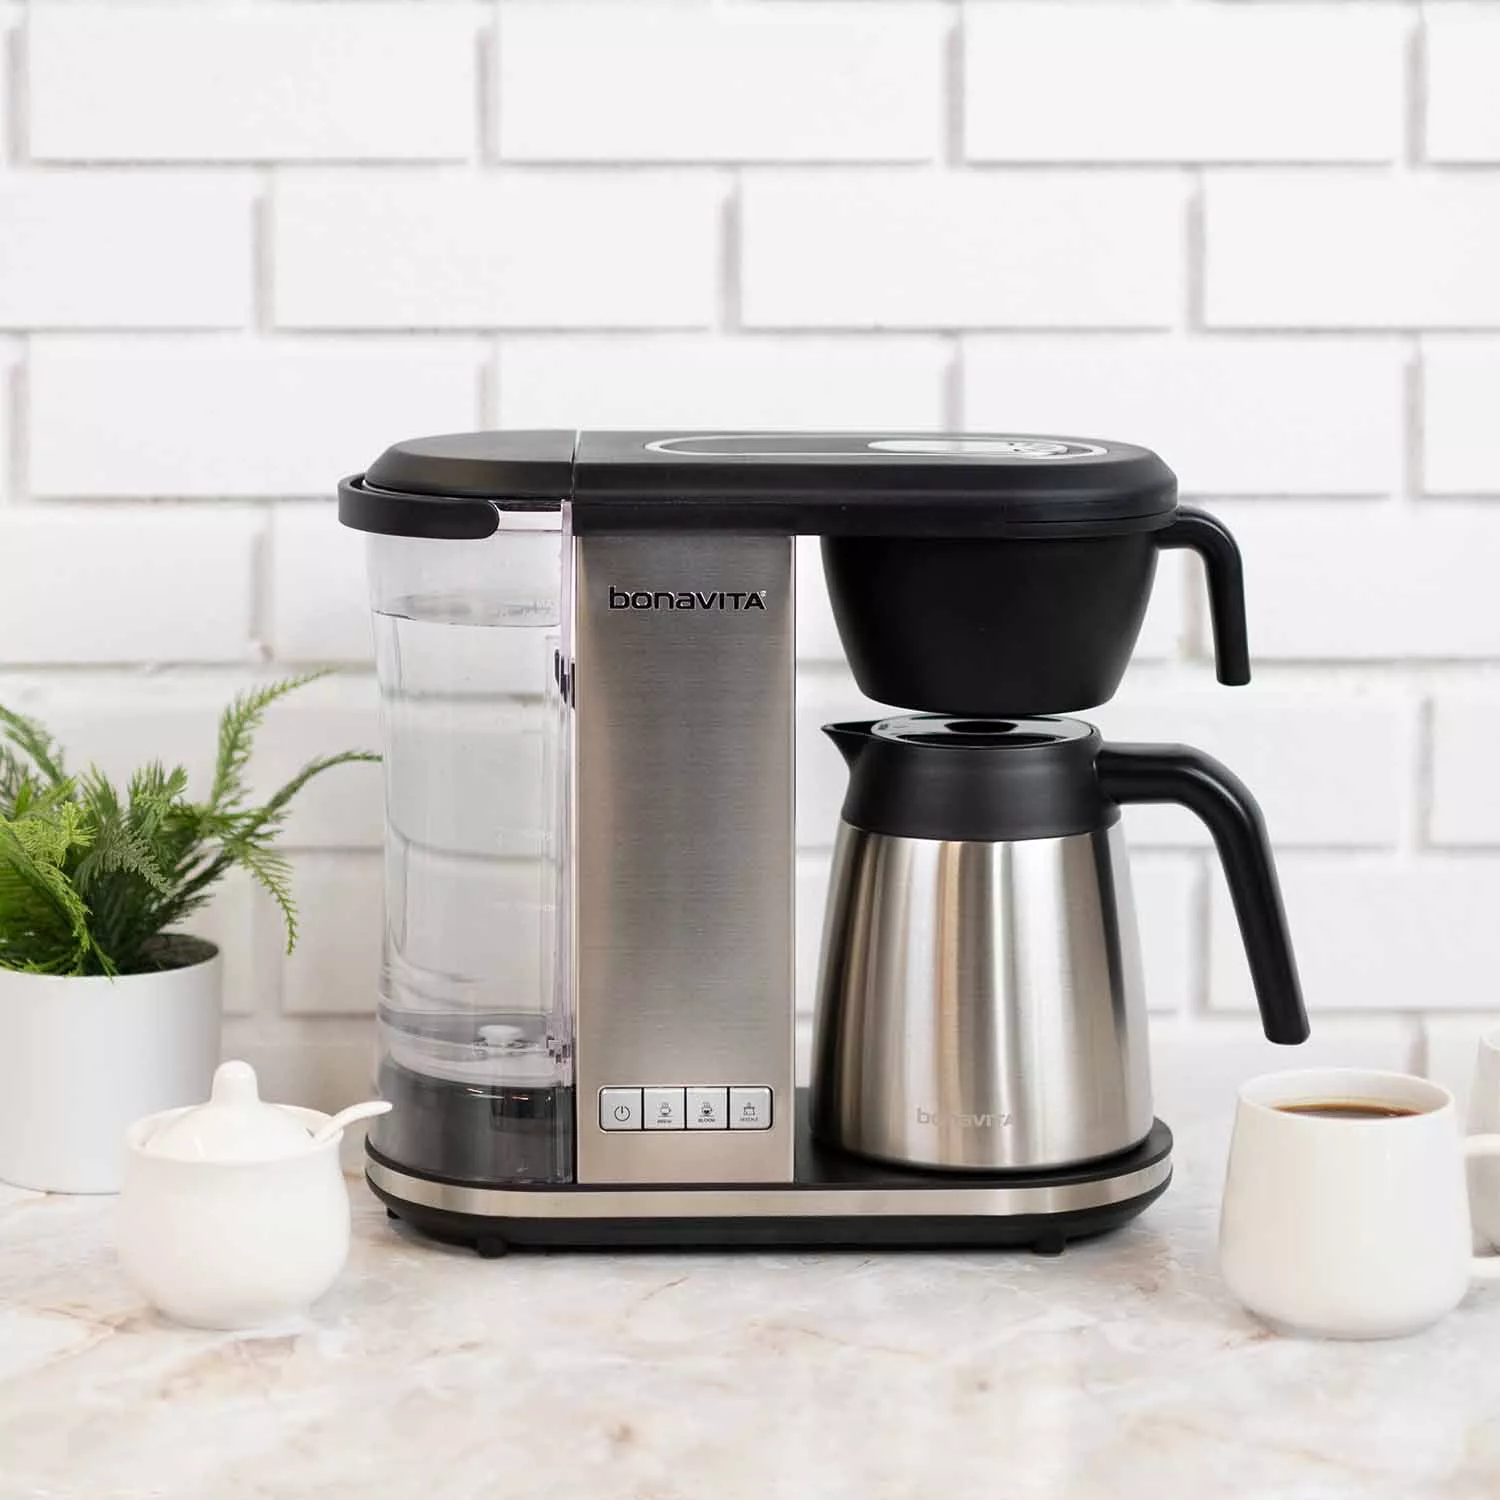 Williams Sonoma Bonavita Enthusiast 8-Cup Coffee Brewer with Thermal Carafe